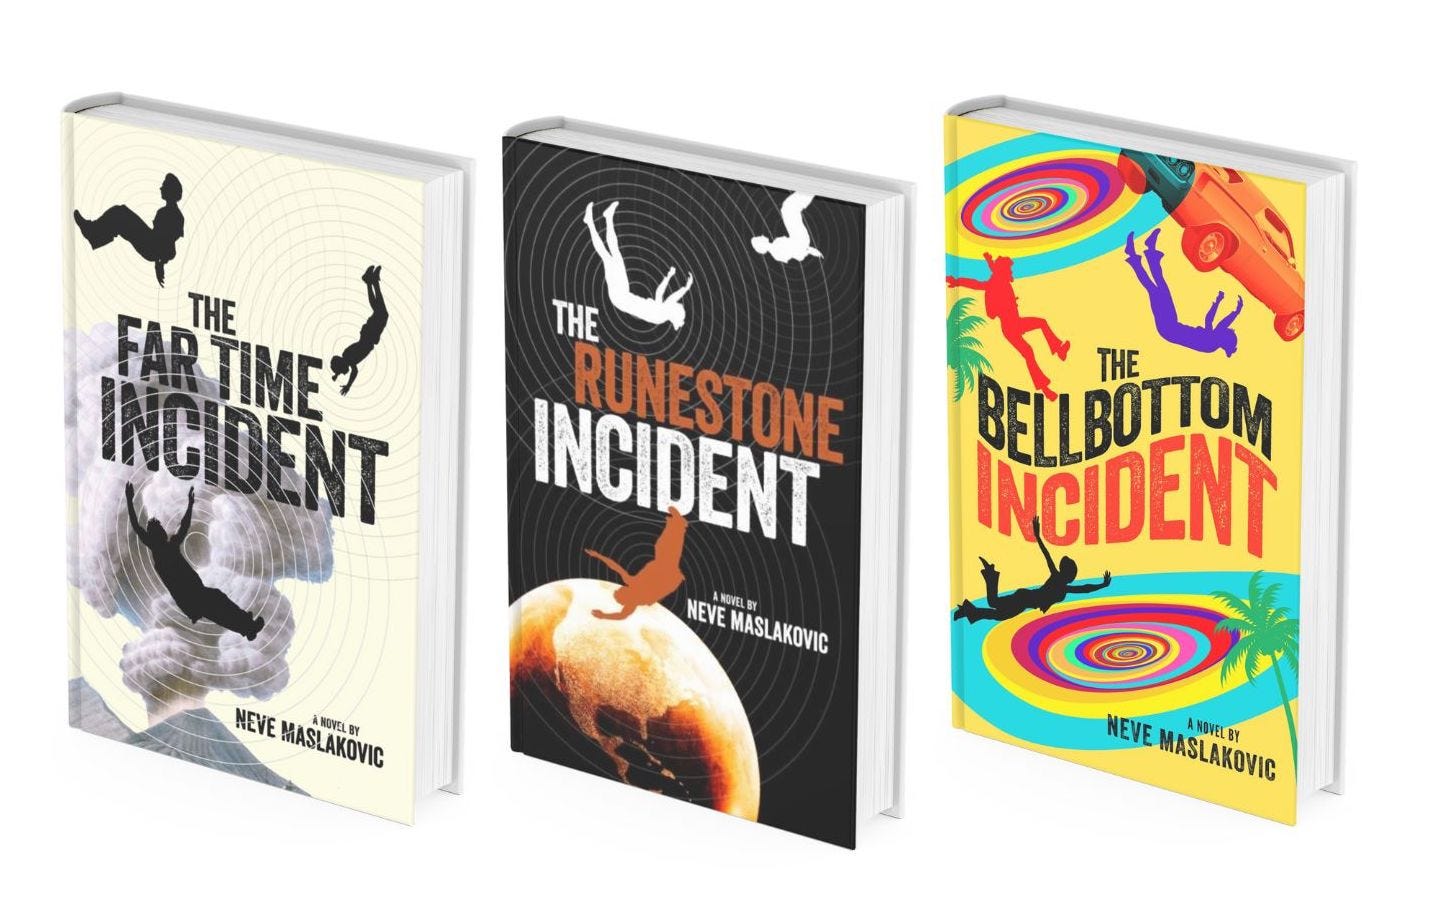 Three book covers, all featuring a woman falling backwards in time. The Far Time Incident cover is dominated by beige and black, the Runestone Incident  by orange, yellow and black, and The Bellbottom Incident by bright seventies colors.